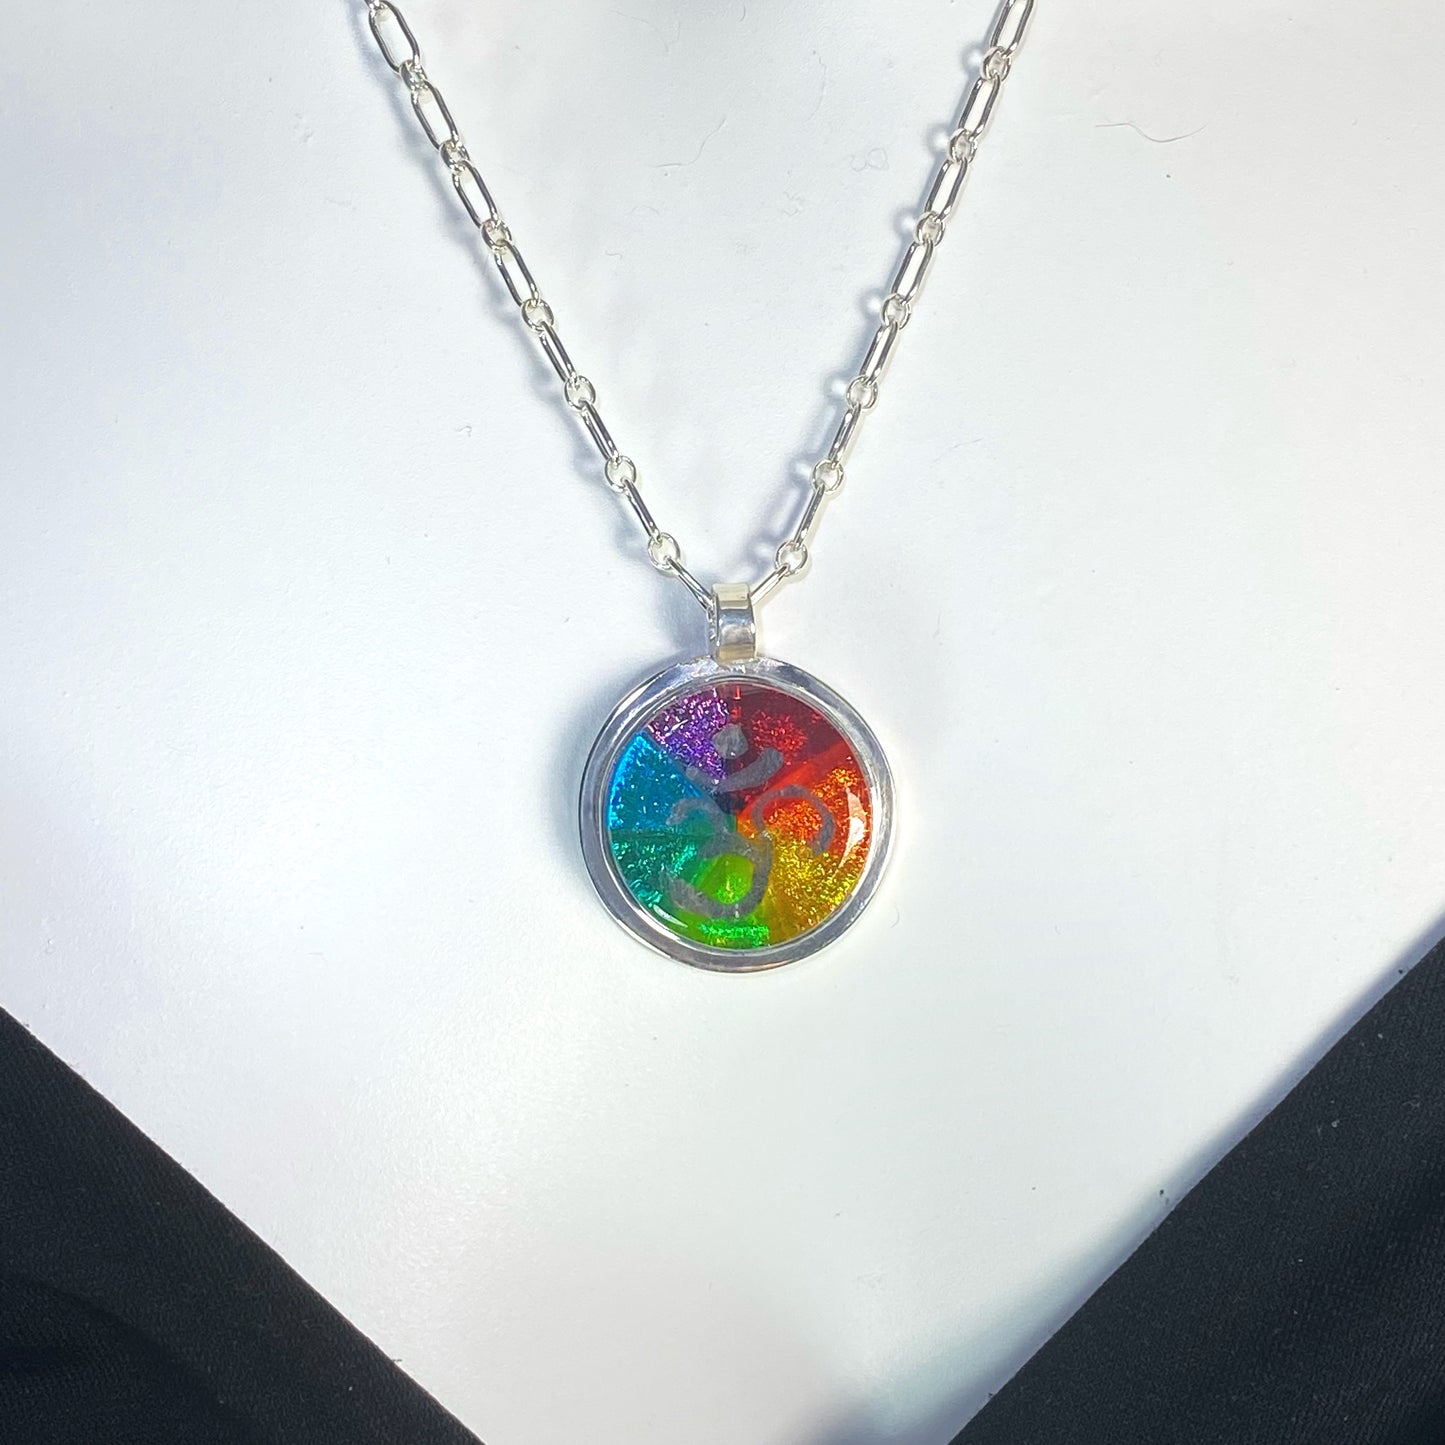 kaleidoscope circle necklace in rainbow colors, silver luster painted OHM symbol,fused glass, glass jewelry, glass and silver jewelry, handmade, handcrafted, American Craft, hand fabricated jewelry, hand fabricated jewellery, Athen, Georgia, colorful jewelry, sparkle, bullseye glass, dichroic glass, art jewelry